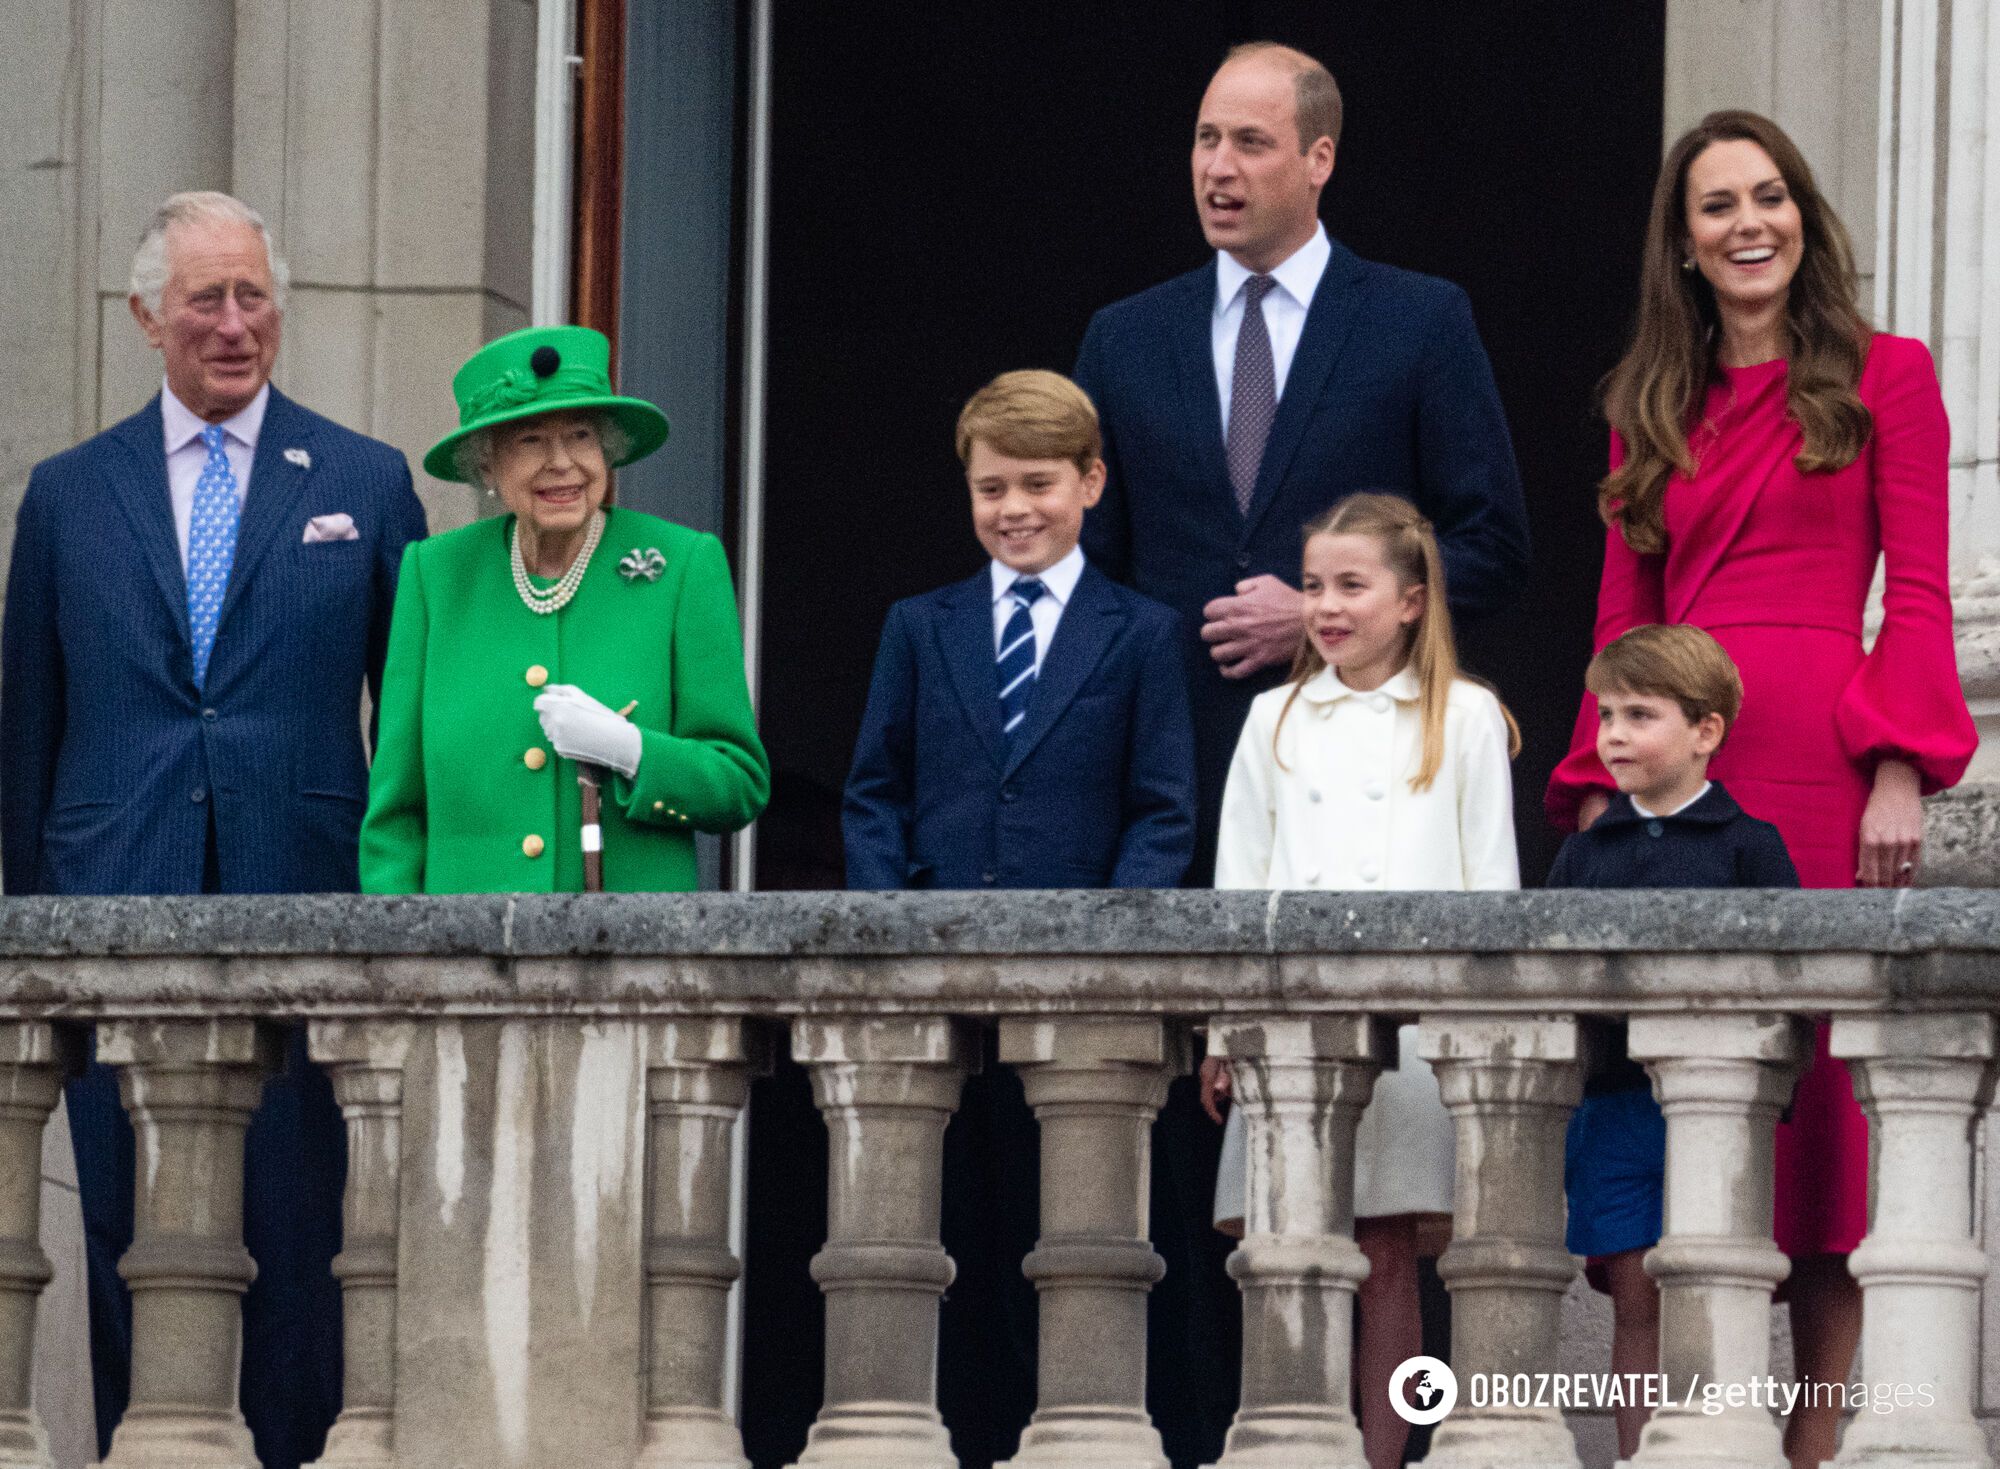 She wanted to be seen as a queen. What was the last appearance of the sick Elizabeth II on the balcony of Buckingham Palace